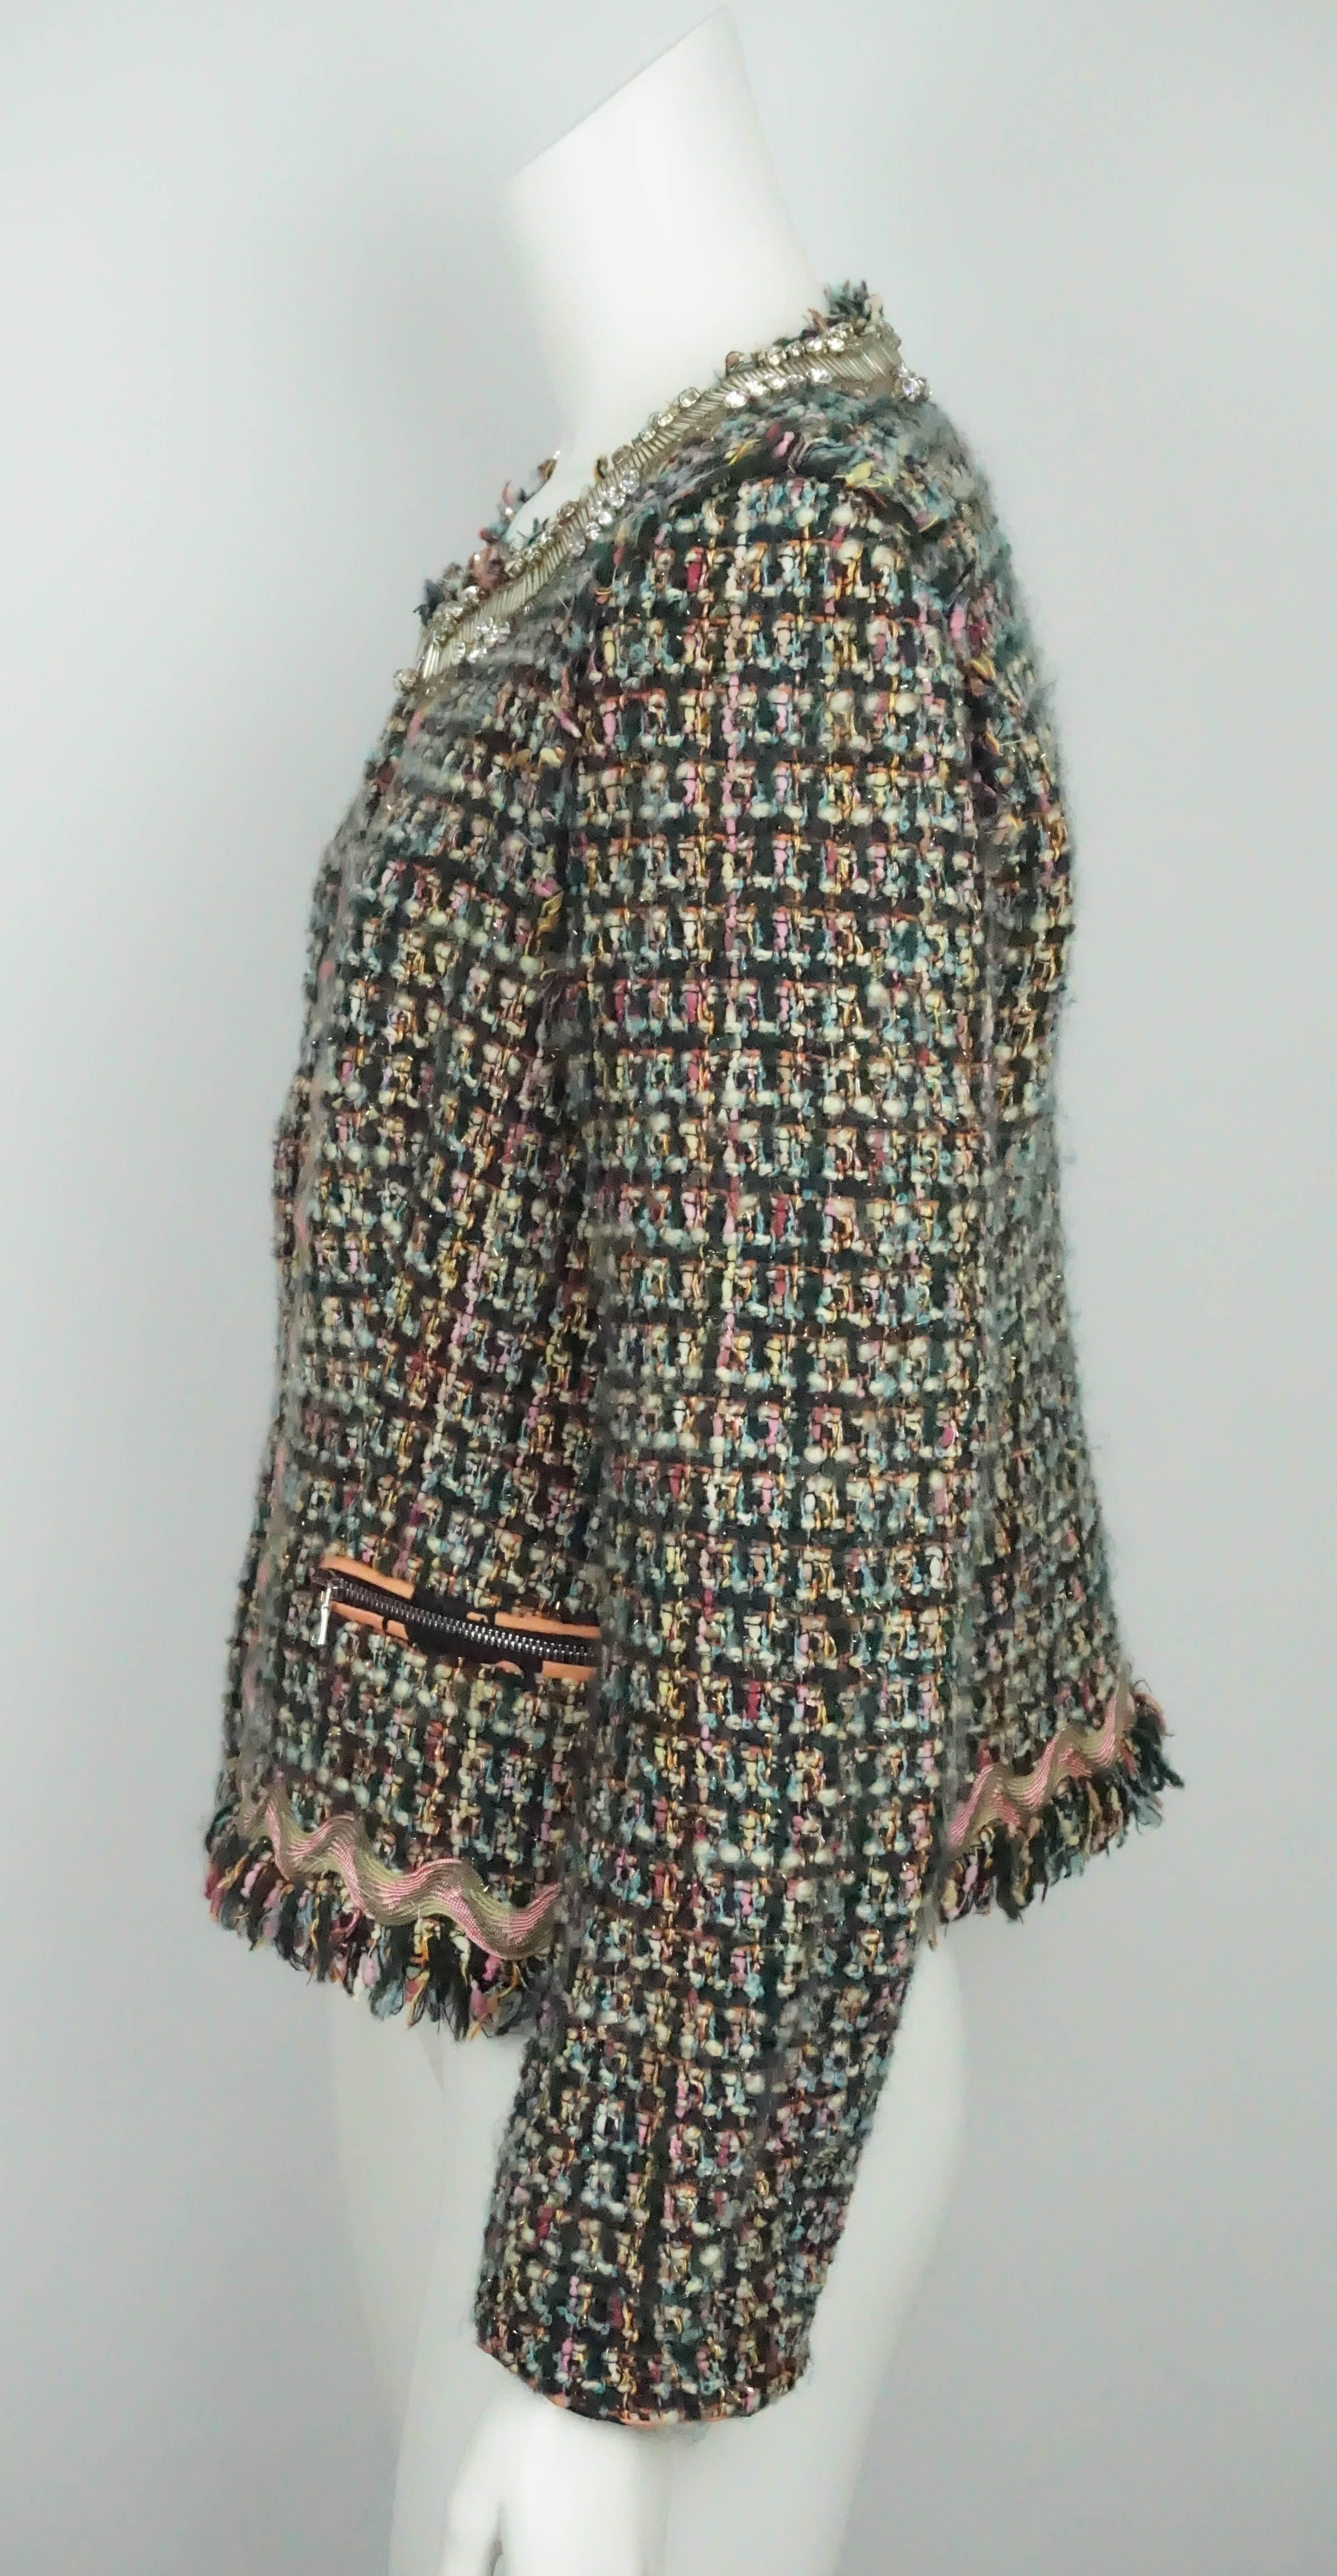 Moschino C&C Multi Color Tweed w/ Rhinestone Collar - 8   This beautiful wool tweed multi colored jacket is in excellent condition. The collar is embellished with rhinestones and large bugle beads and there is a zipper down the front and also on the